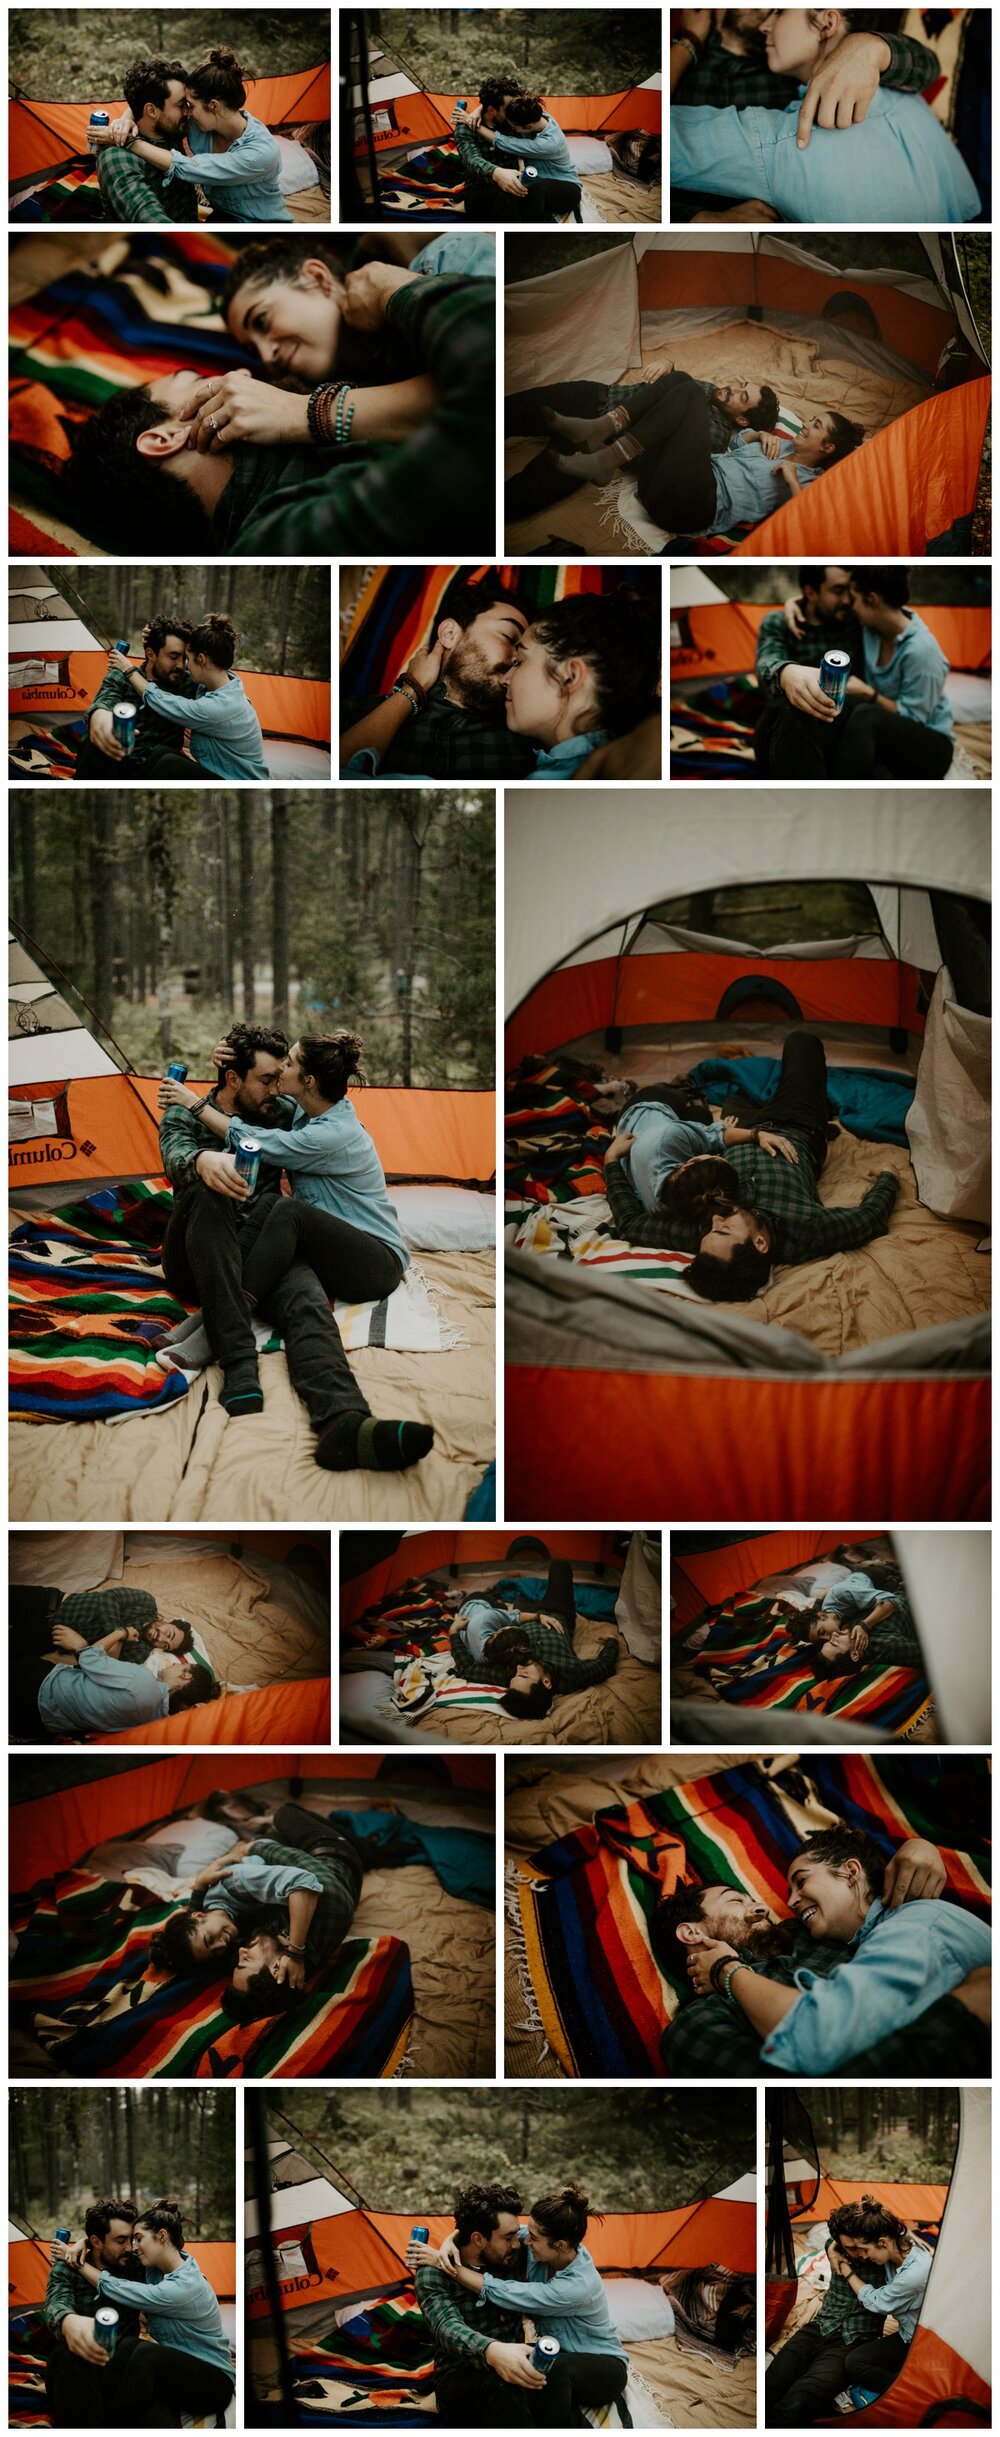 If you and your significant other don’t giggle like kids at a sleepover all night in your tent, are you really even soulmates? Well, you probably still are. But giggles are more fun!